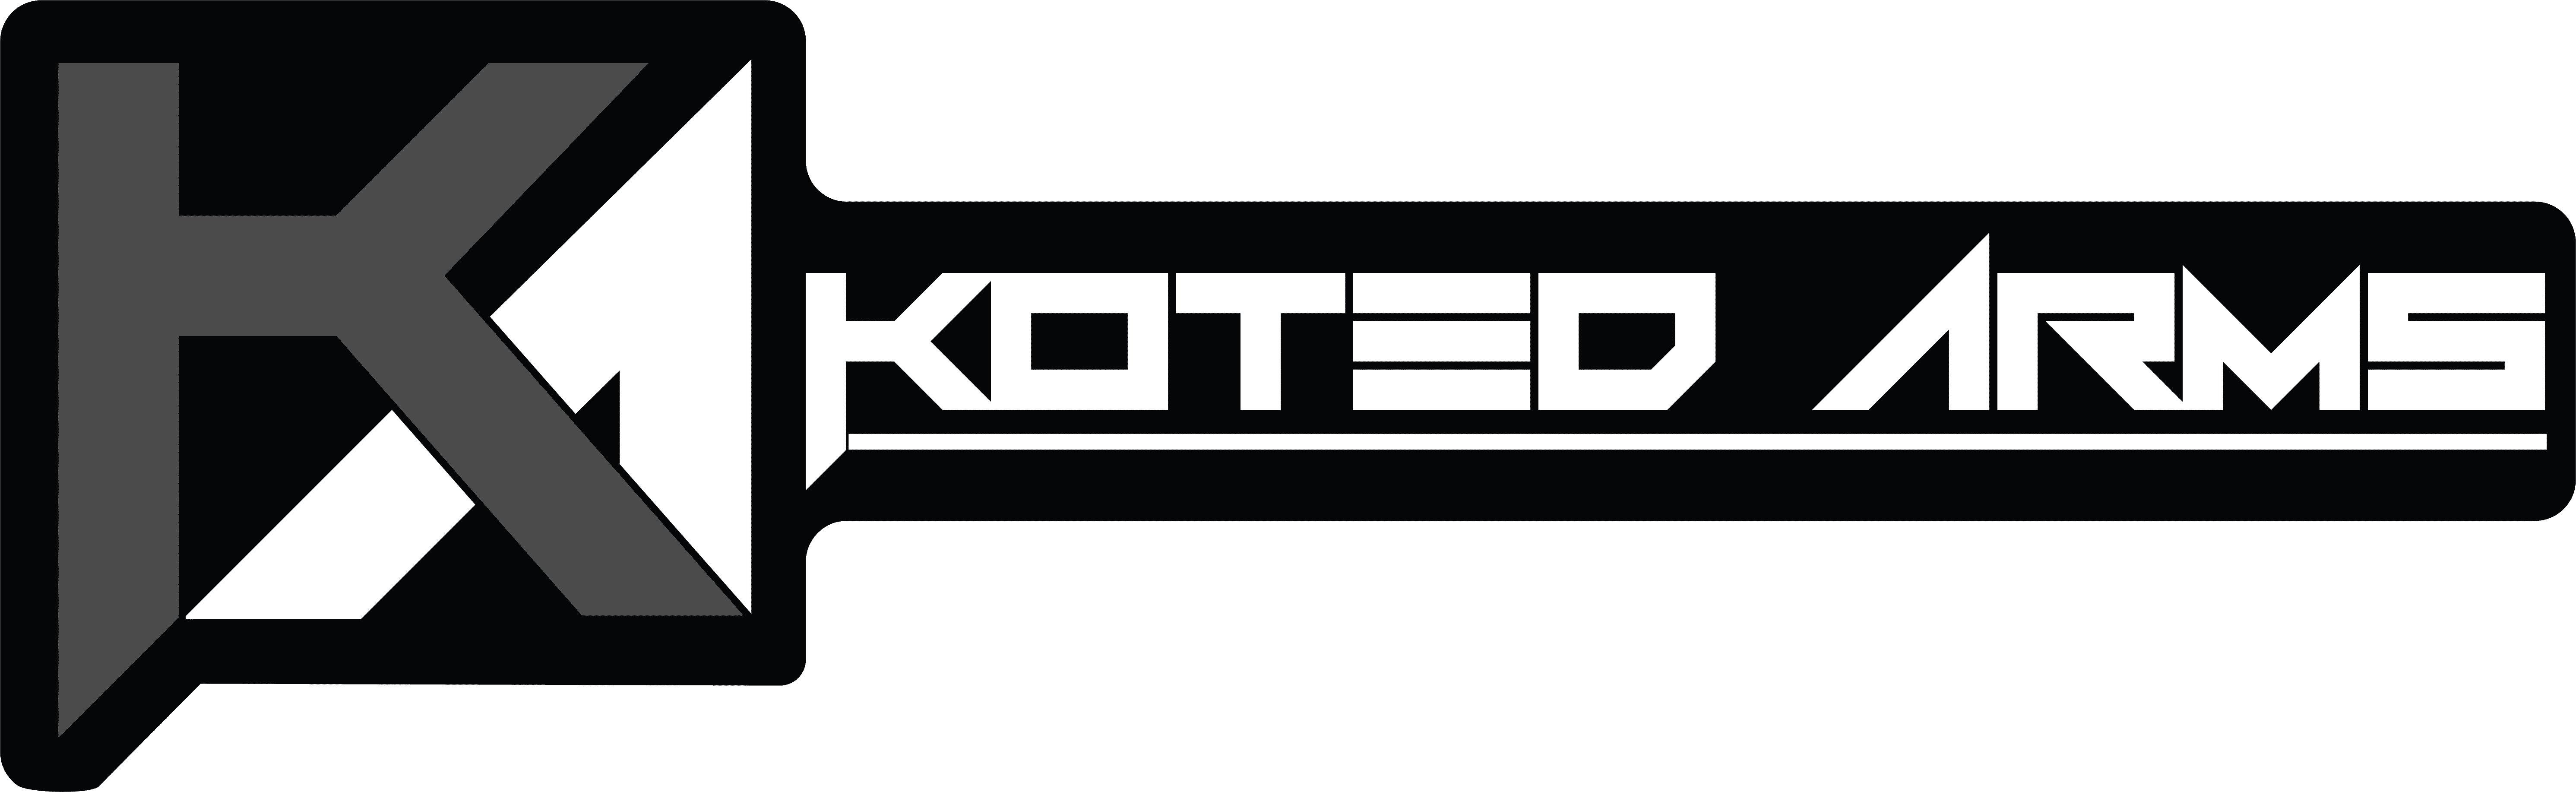 Koted Arms Professional Cerakote Services